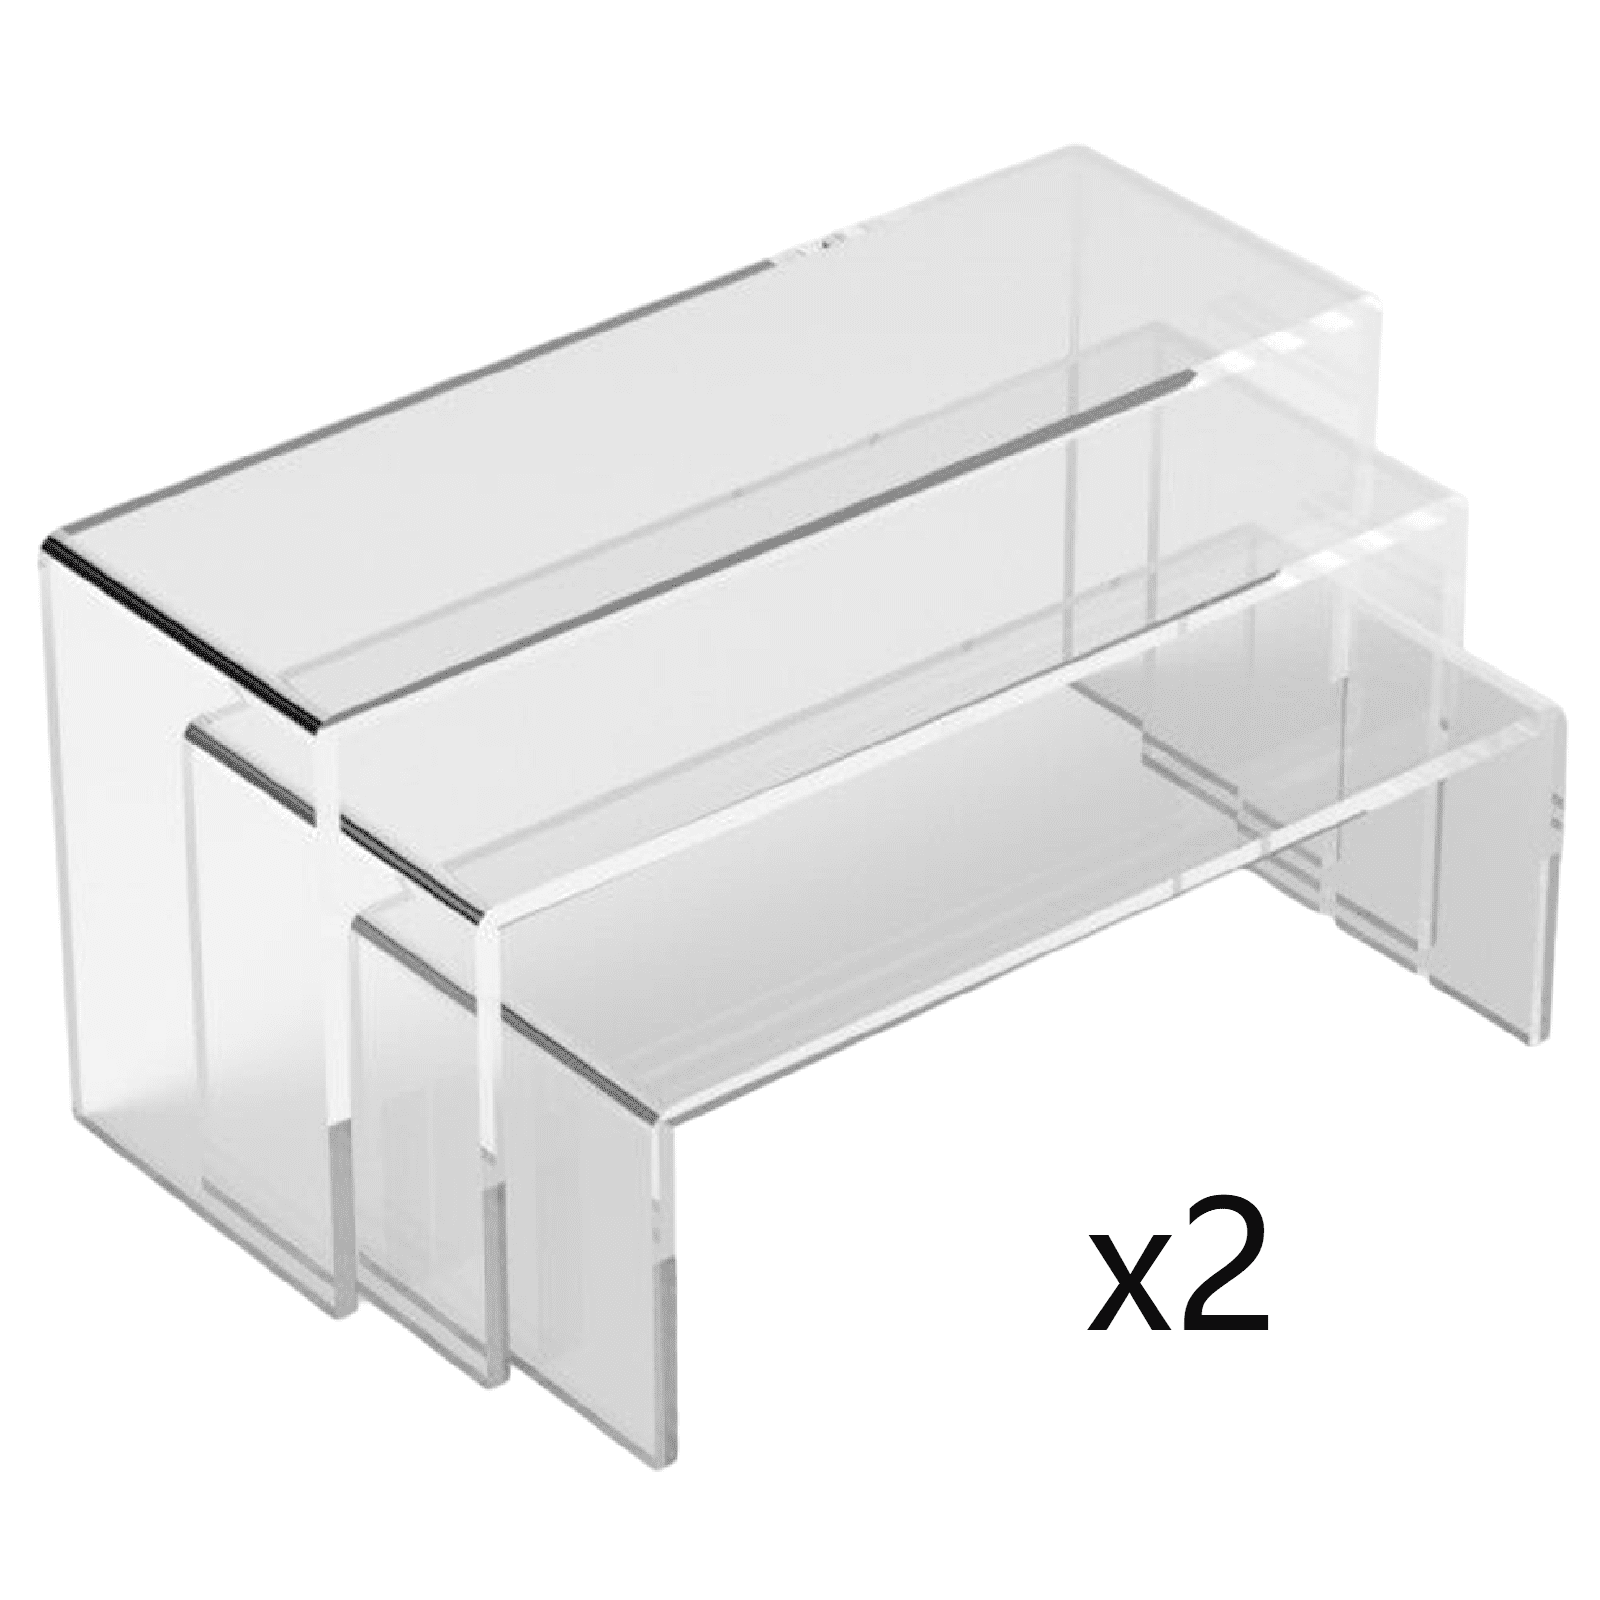 2x Deluxe Acrylic 3 Tier Display Stand Removable Rack for Model Figures 